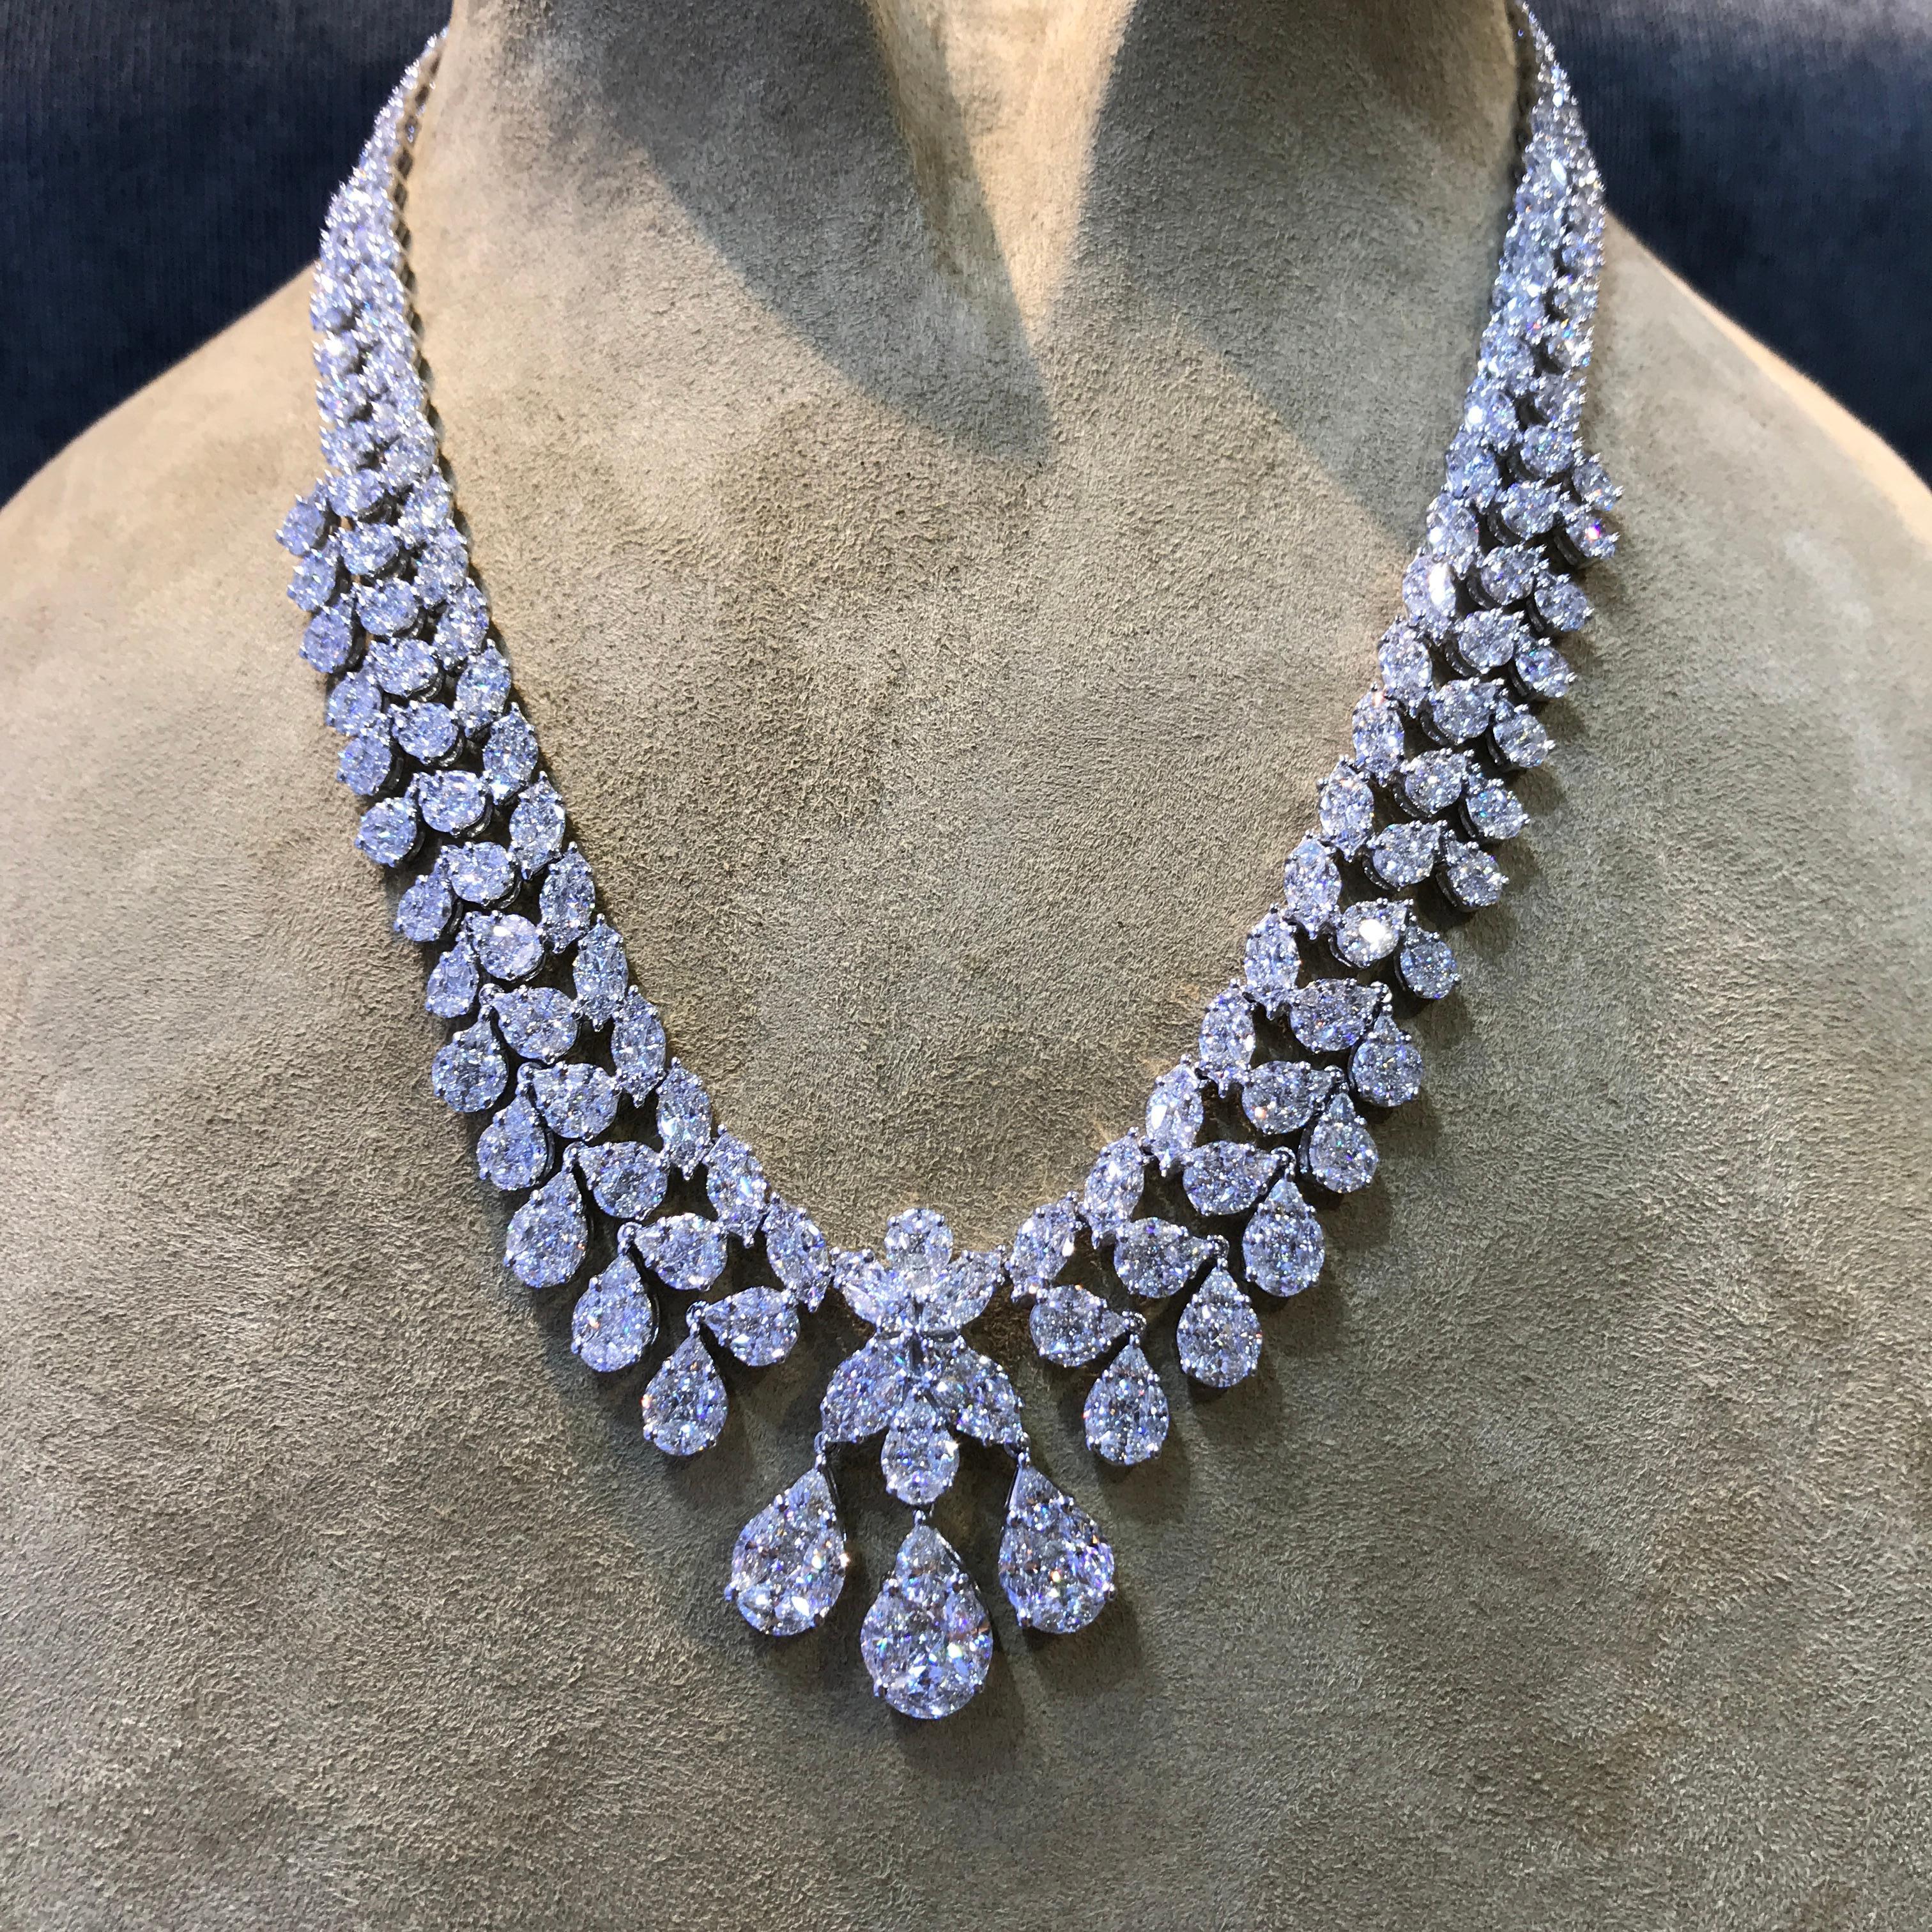 Class GILIN Collection - simple elegance diamond necklace , superb craftsmanship with white diamonds. Delicate and sophisticated!


Necklace - Length: 16.75 in / Width: 8-13.8 mm / Depth: 2.88 mm
Main Stone - Height: 30 mm / Width: 17 mm / Depth: